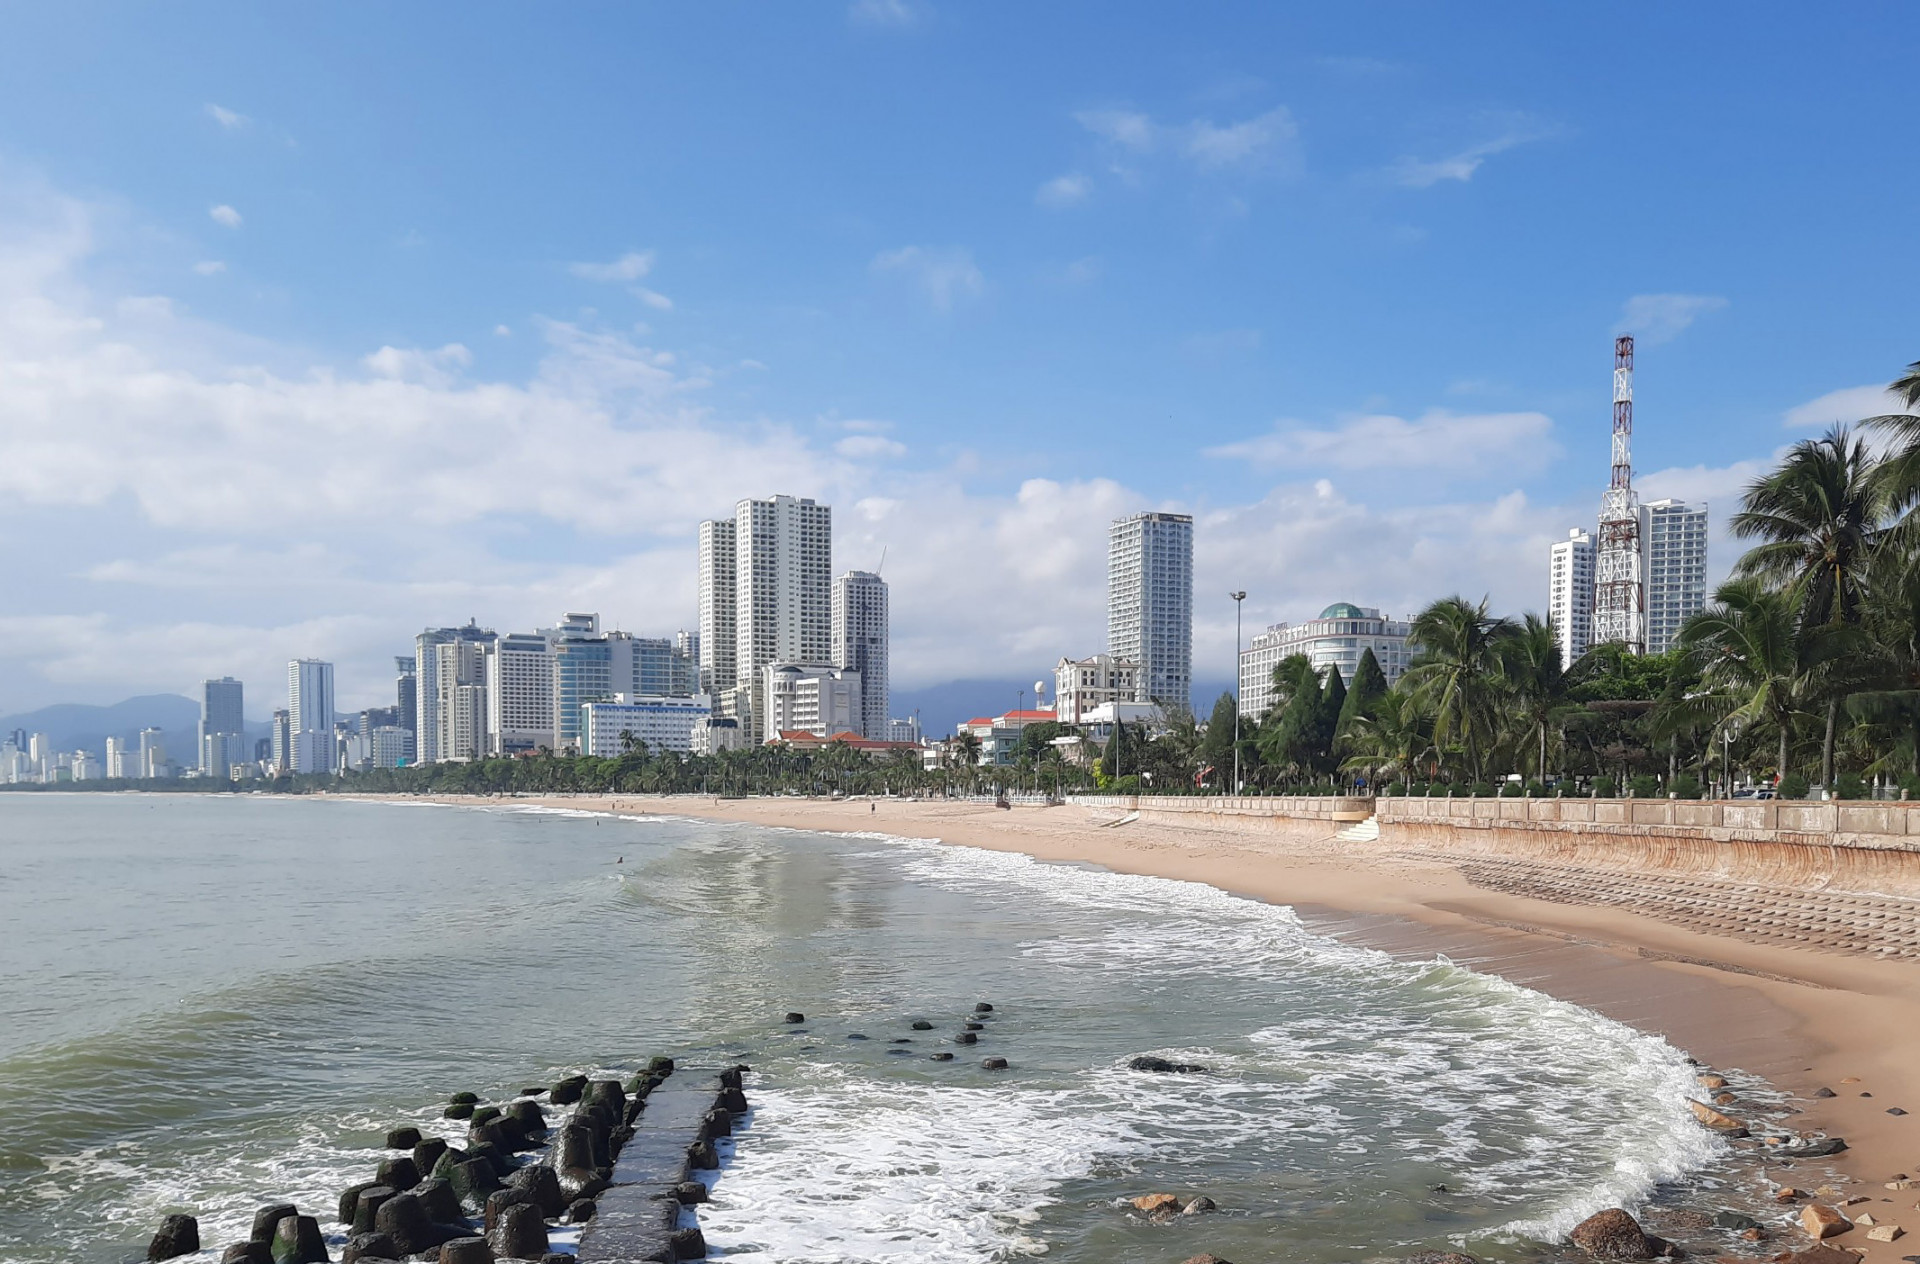 Nha Trang and Vung Tau beaches are in top 10 most famous beaches in the world on TikTok